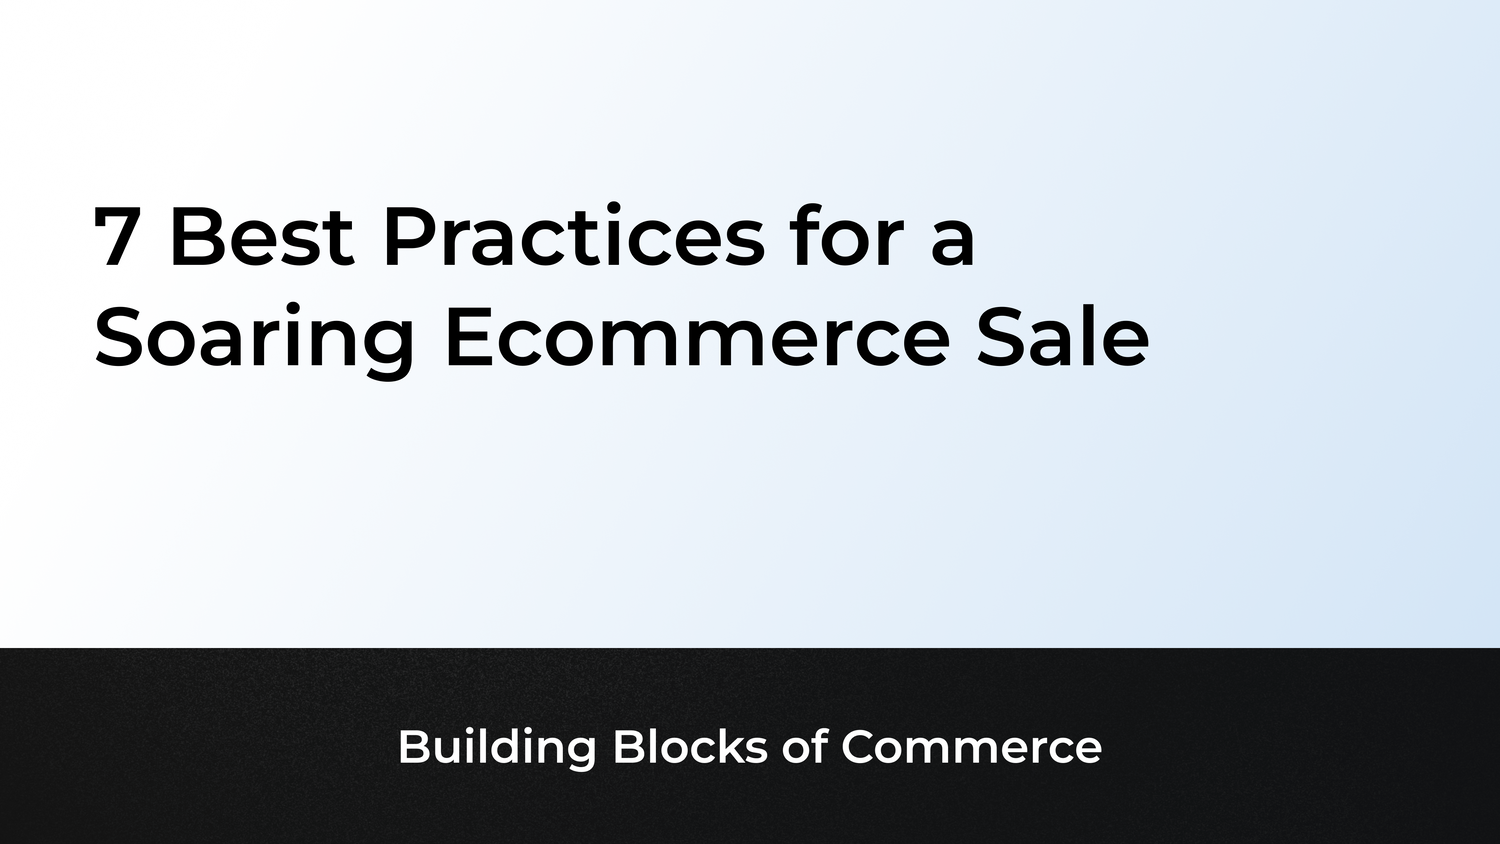 7 Best Practices for a Soaring Ecommerce Sale